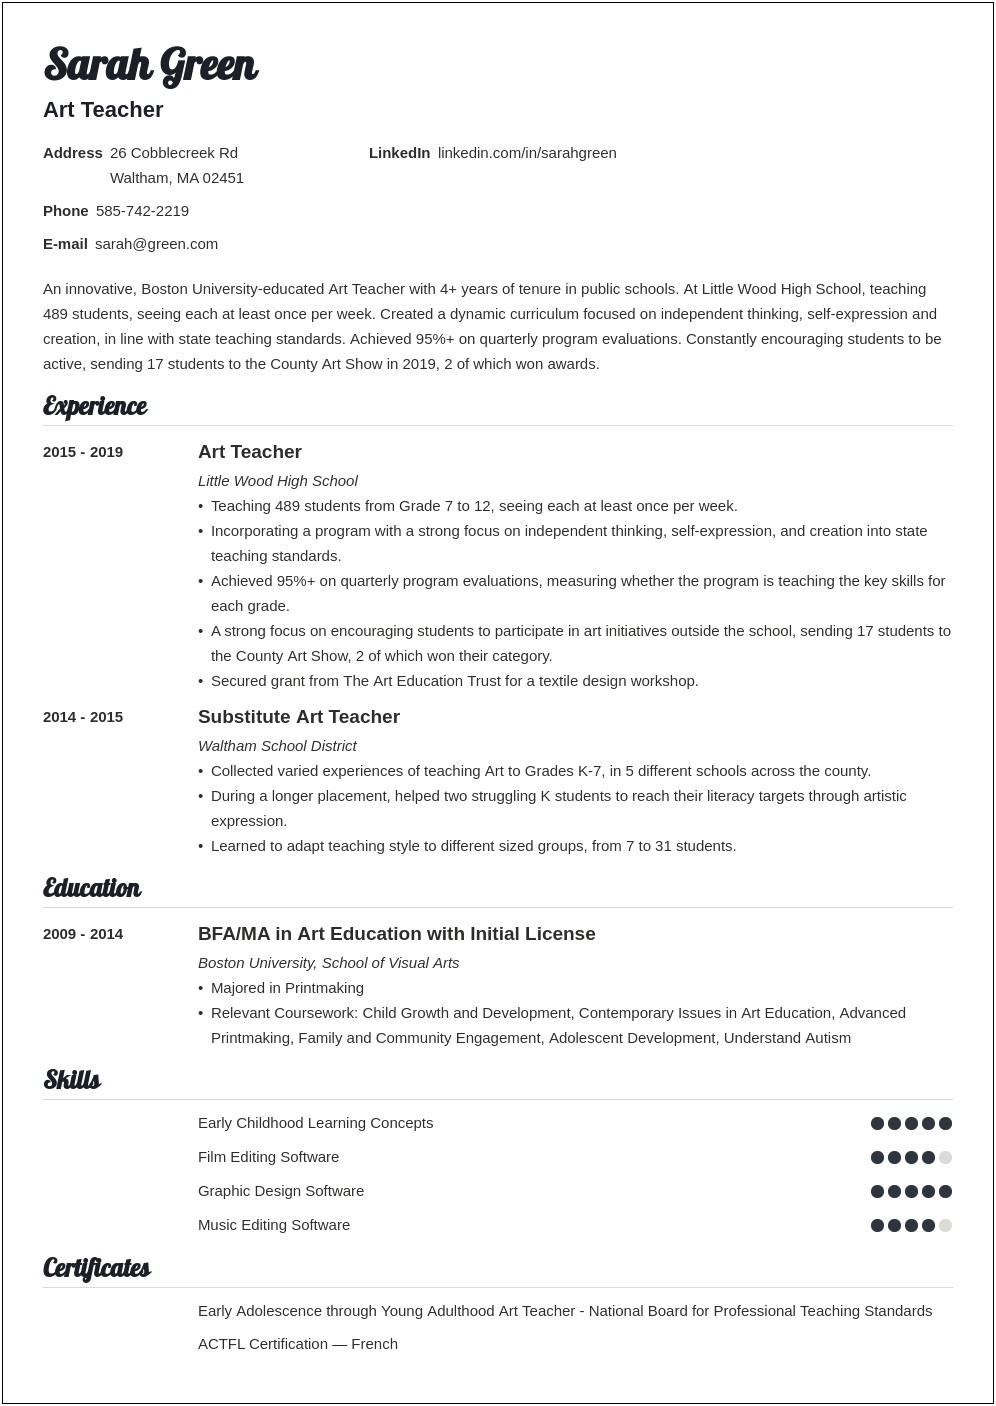 Adjunct Professor Resume Samples With No Experience